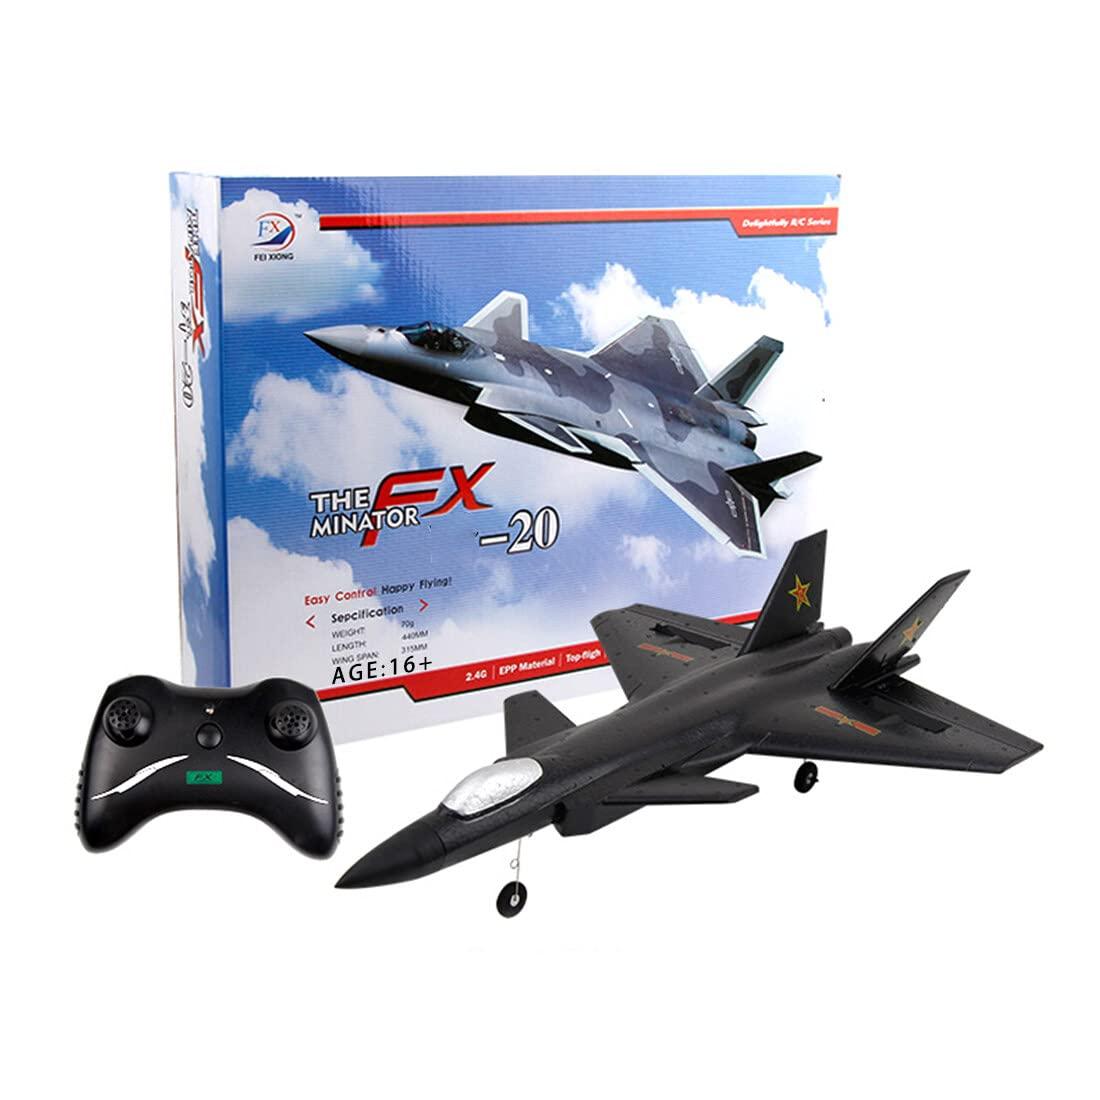 Rc Fighter Plane Toy: Focusing on Top Brands and Retailers of RC Fighter Plane Toys.